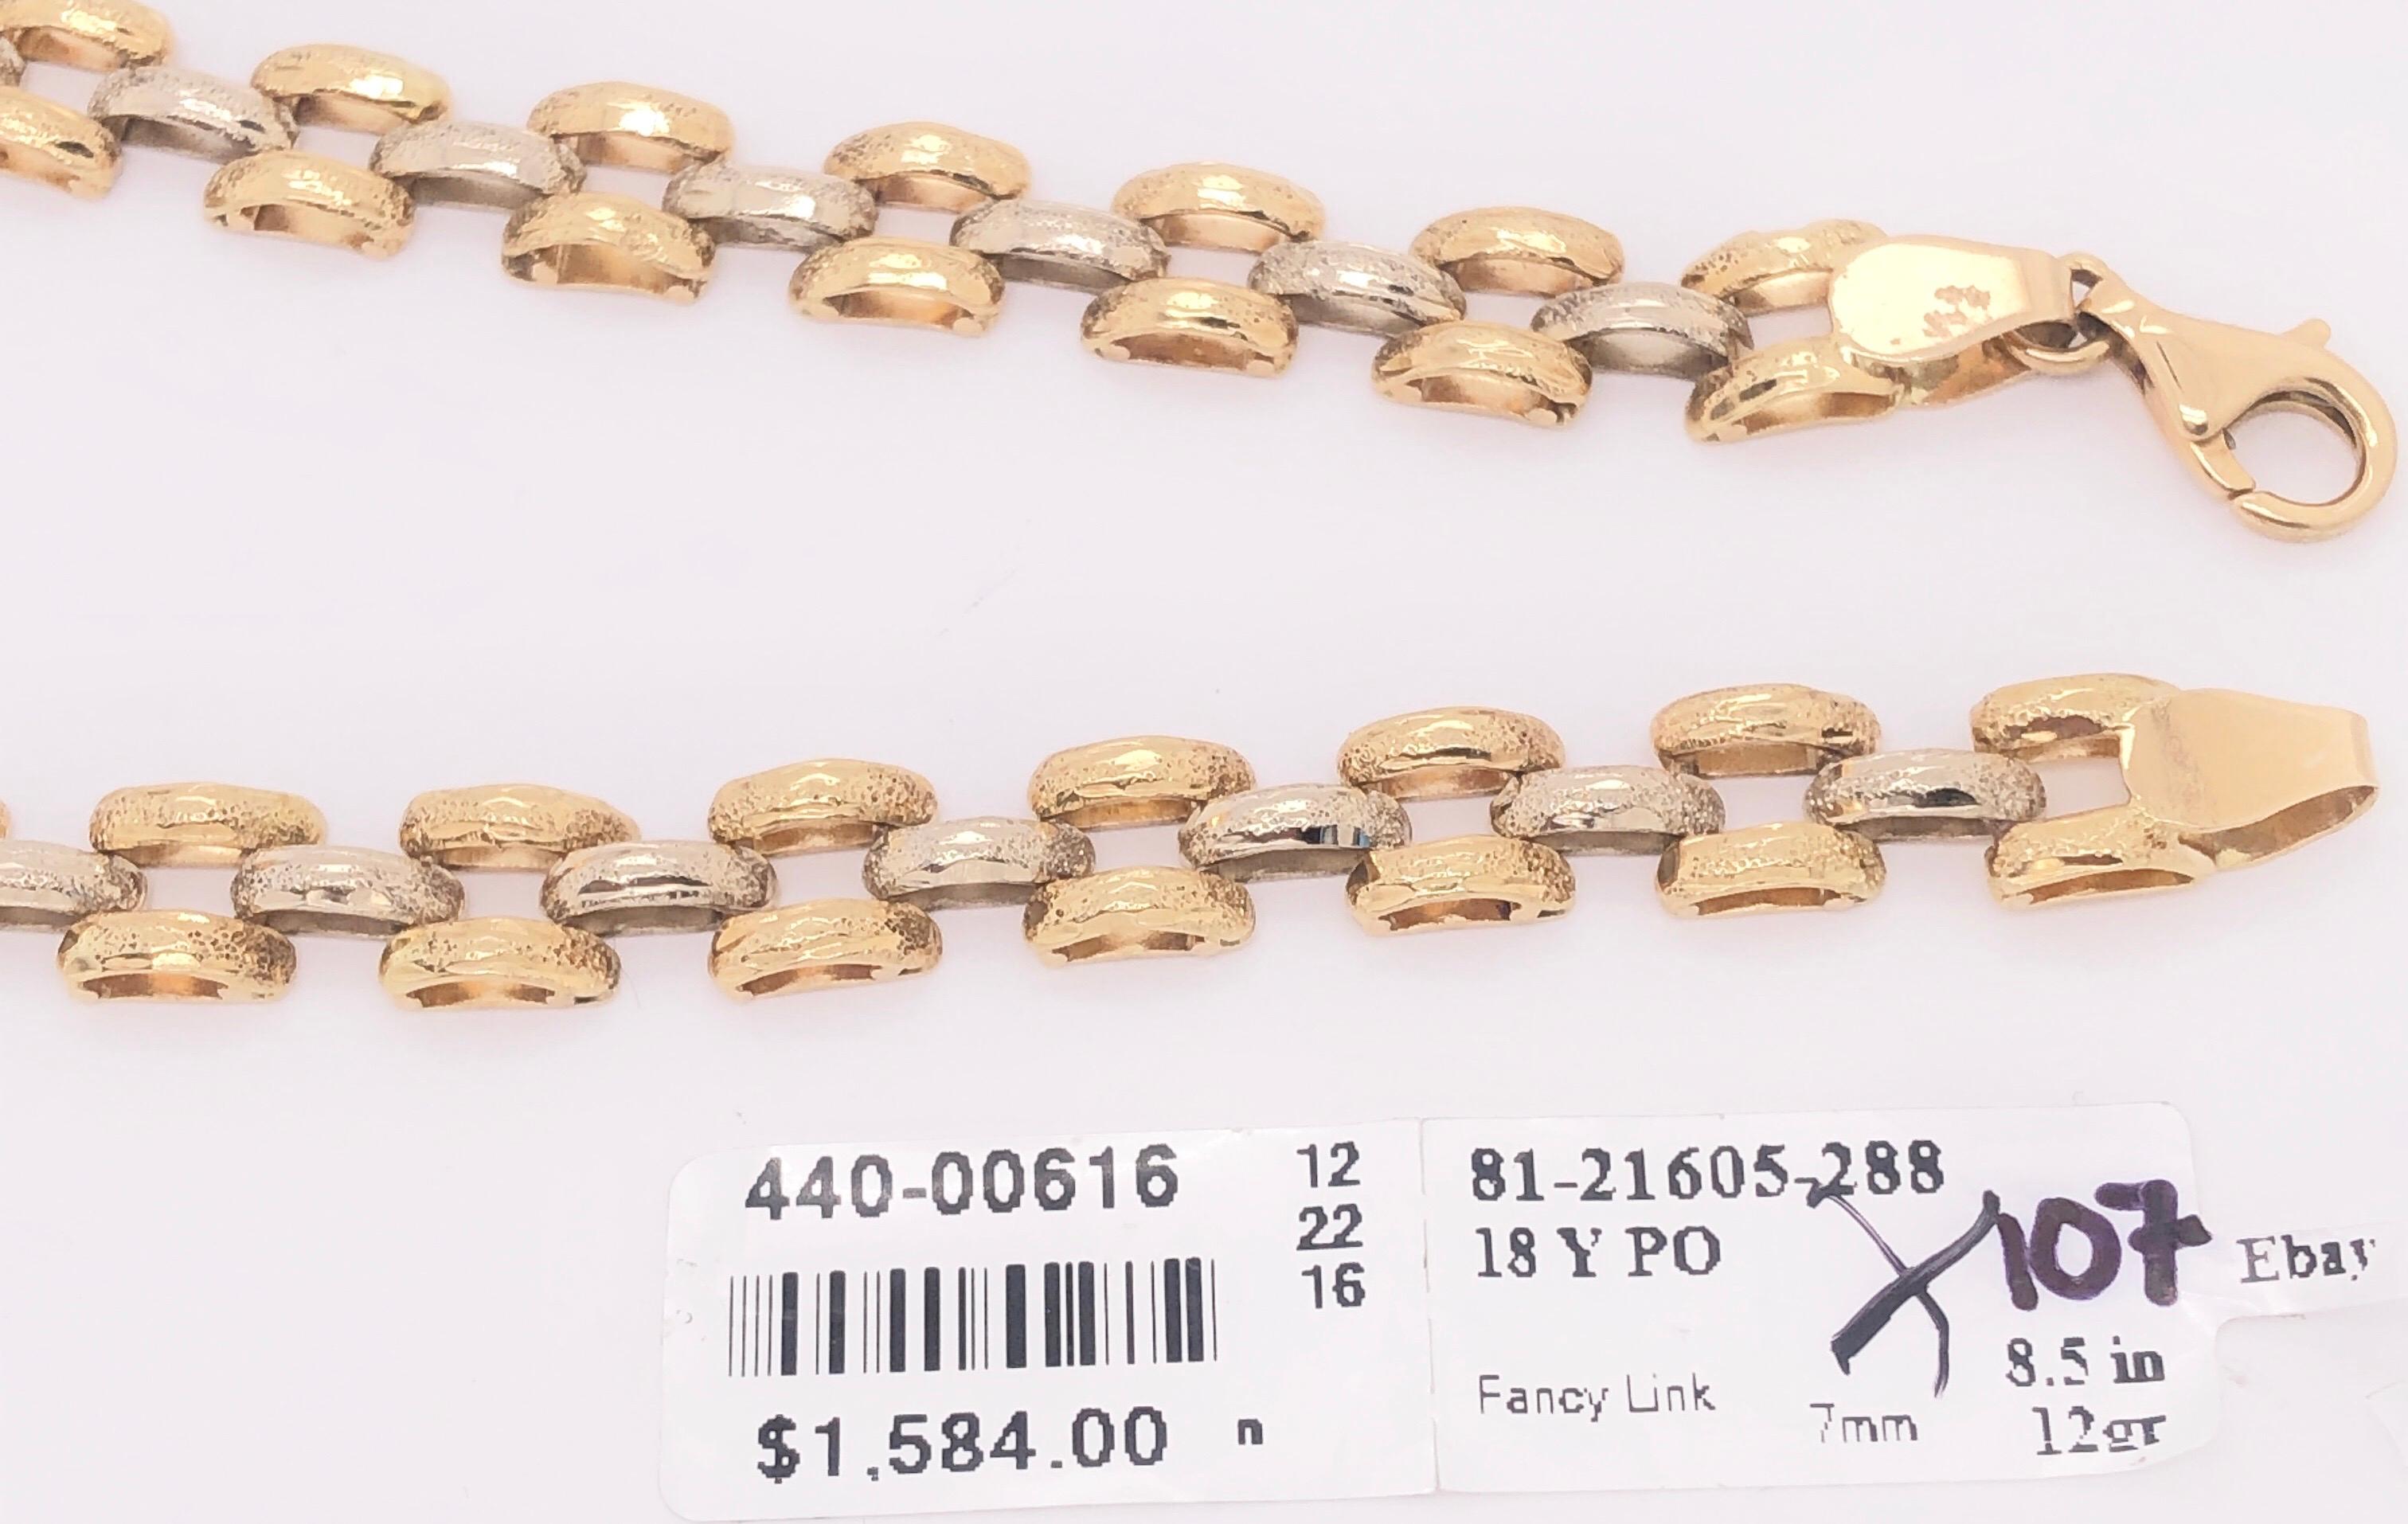 18 Karat Two-Tone Yellow and White Gold Fancy Link Bracelet For Sale 2